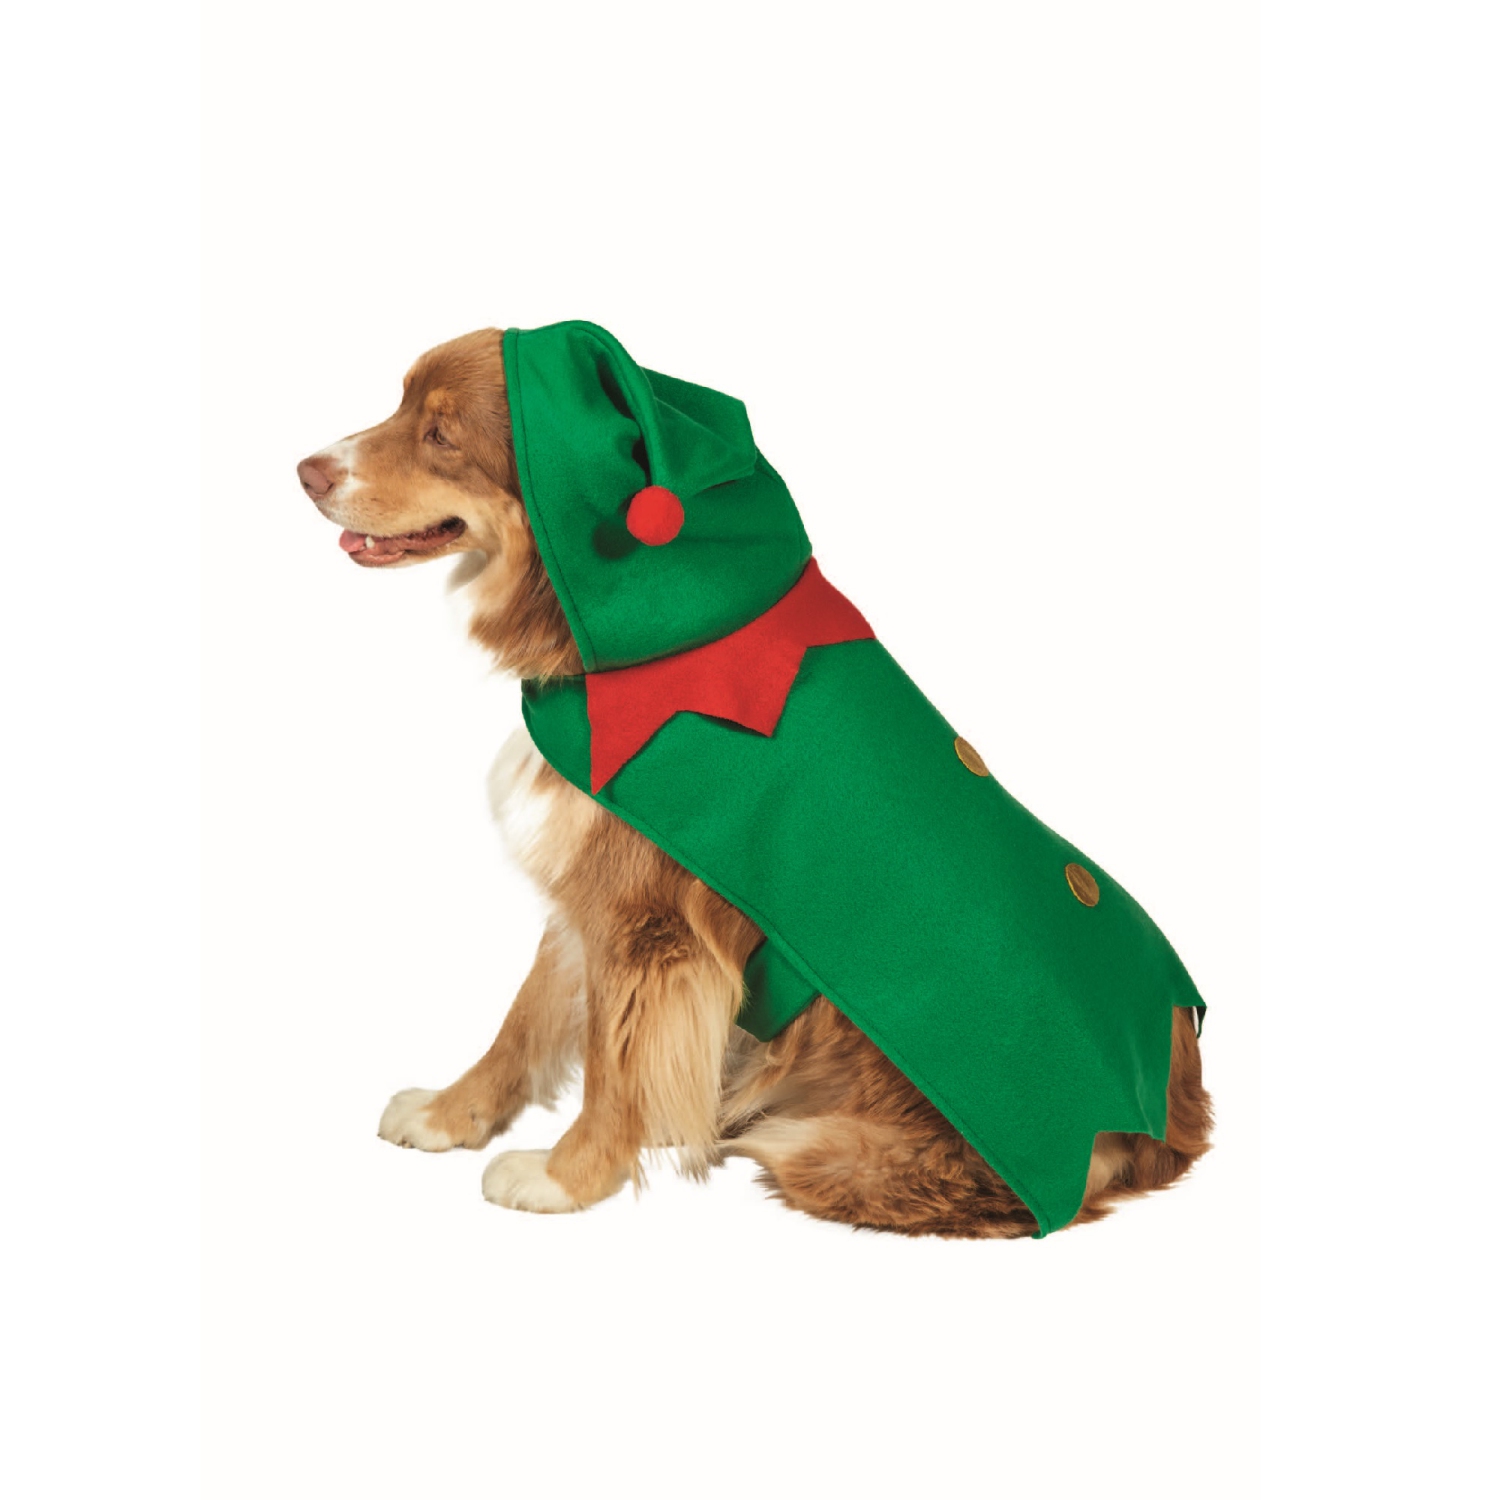 27" Green and Red Christmas Elf Dog Costume - Size M